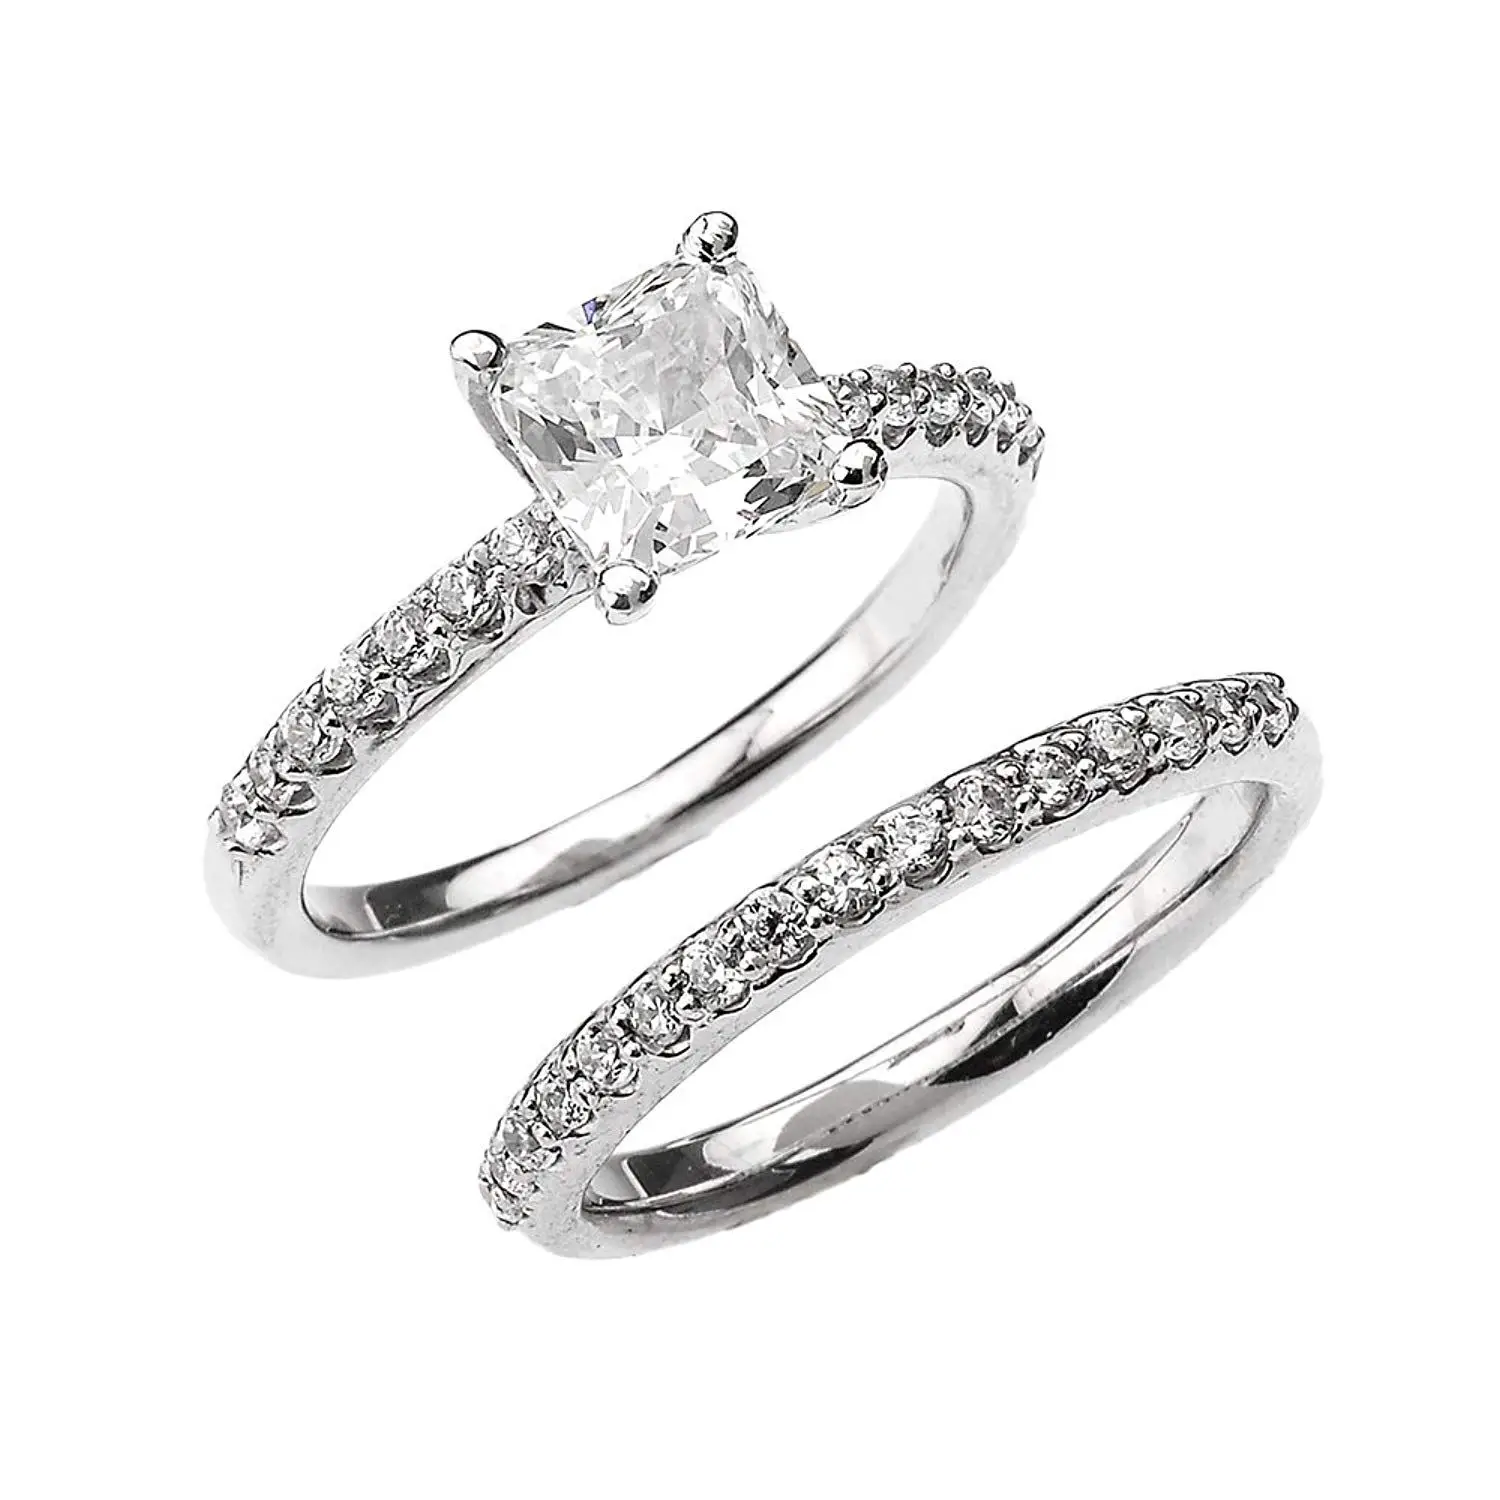 10k White Gold 2.5 Carat Total Weight Princess CZ Classic Engagement ...